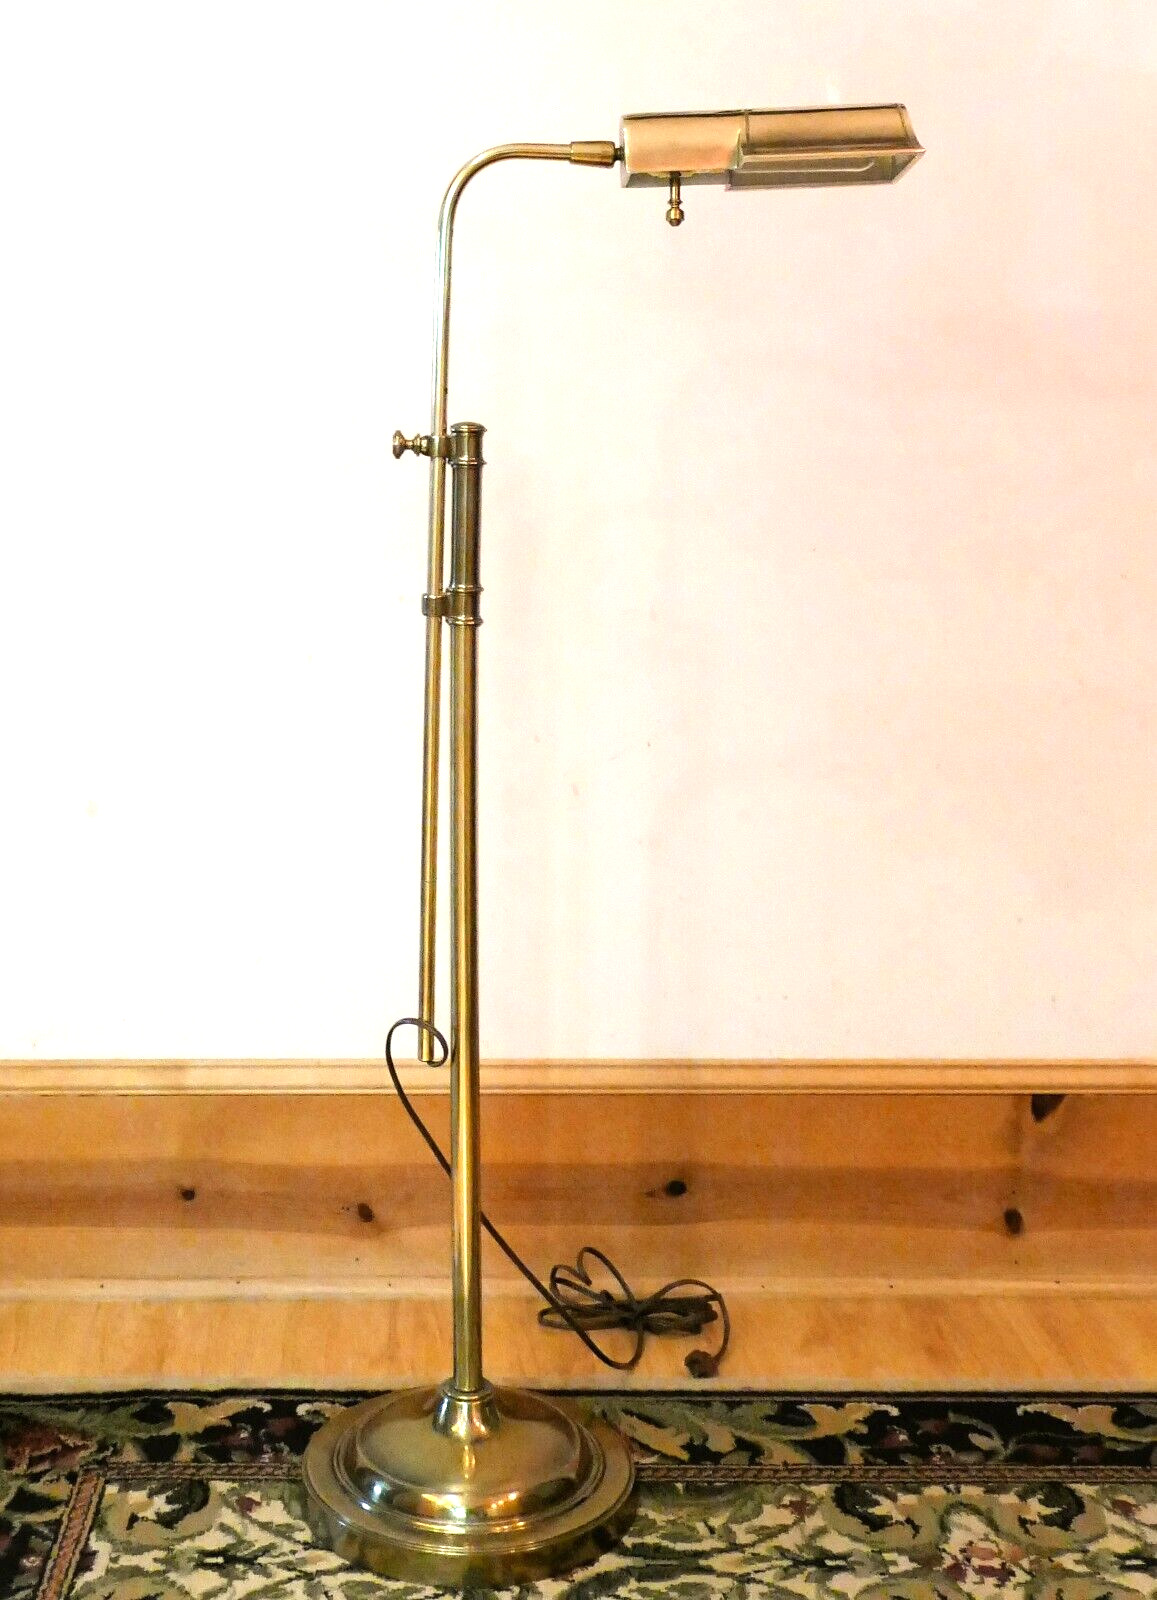 Classic Stiffel Old Brass Cast Adjustible Pharmacy Floor Lamp w/Dimmer #4503